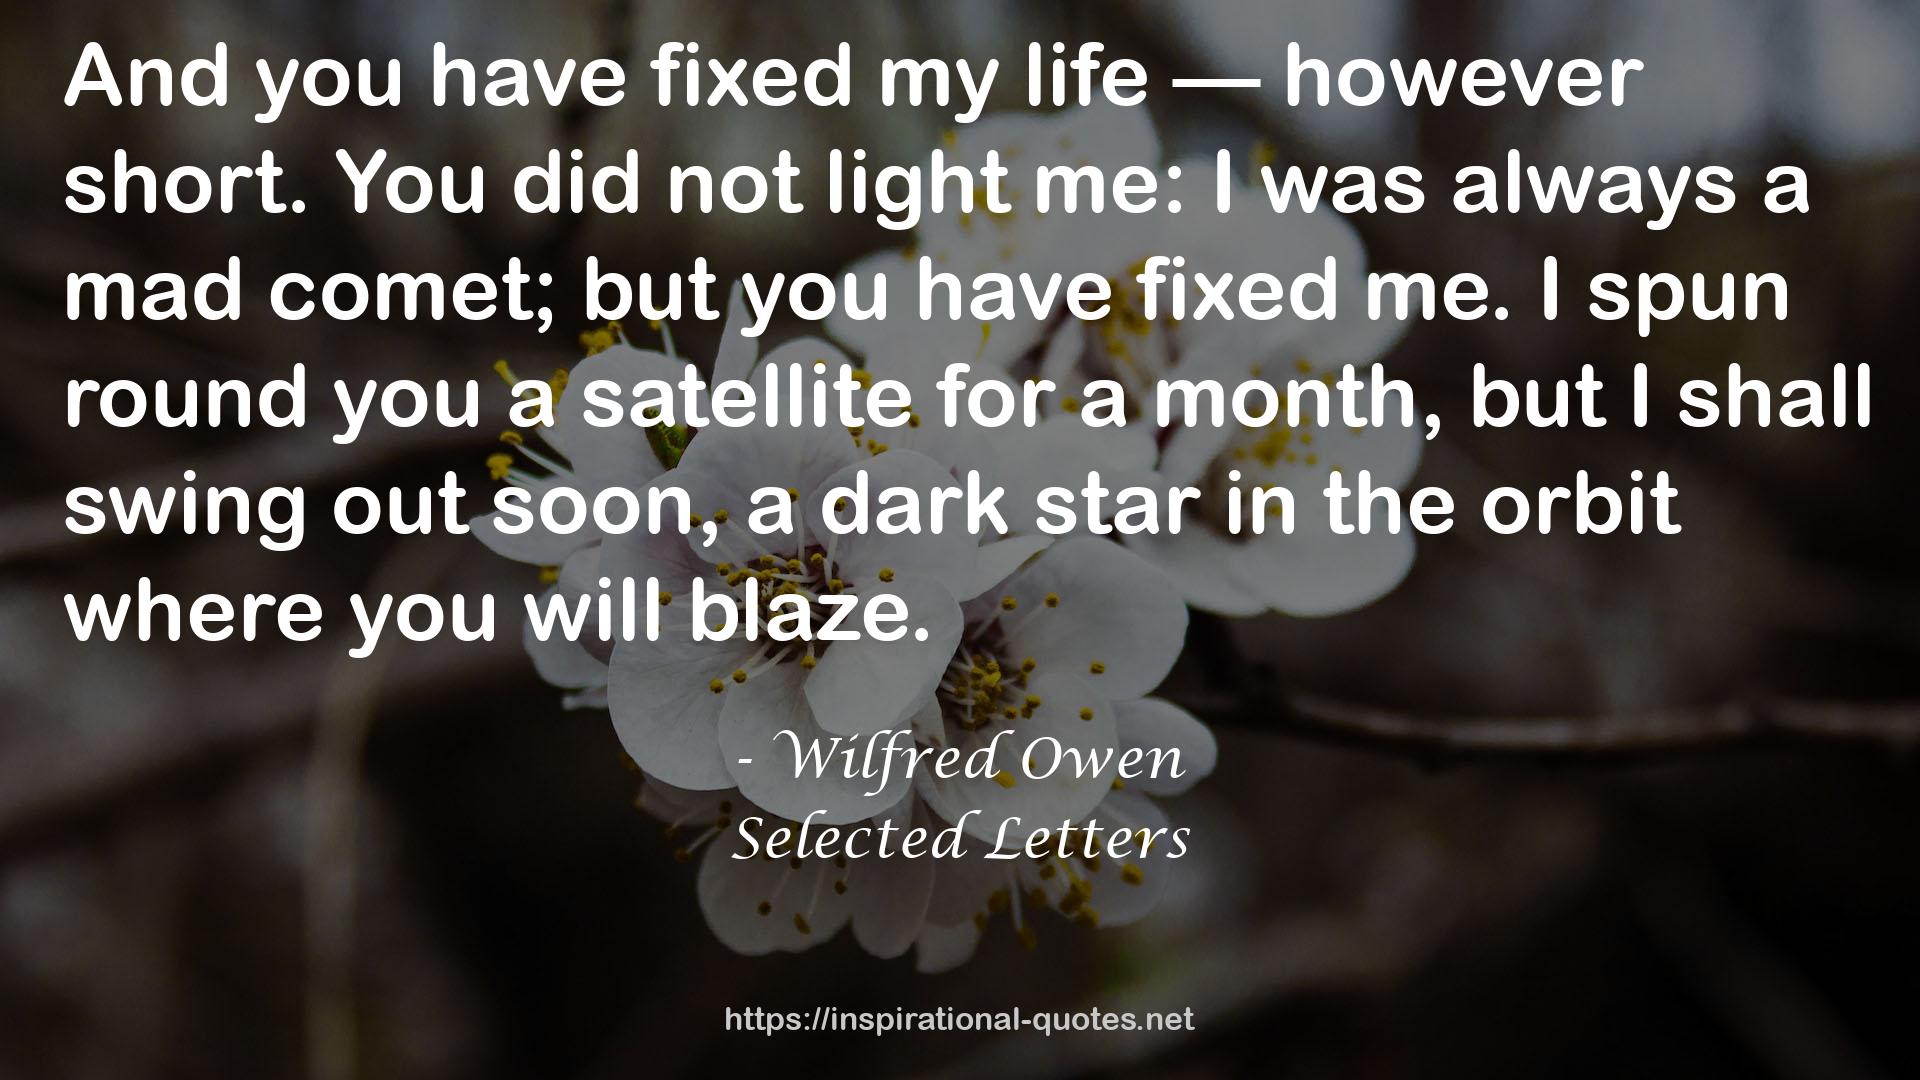 Selected Letters QUOTES